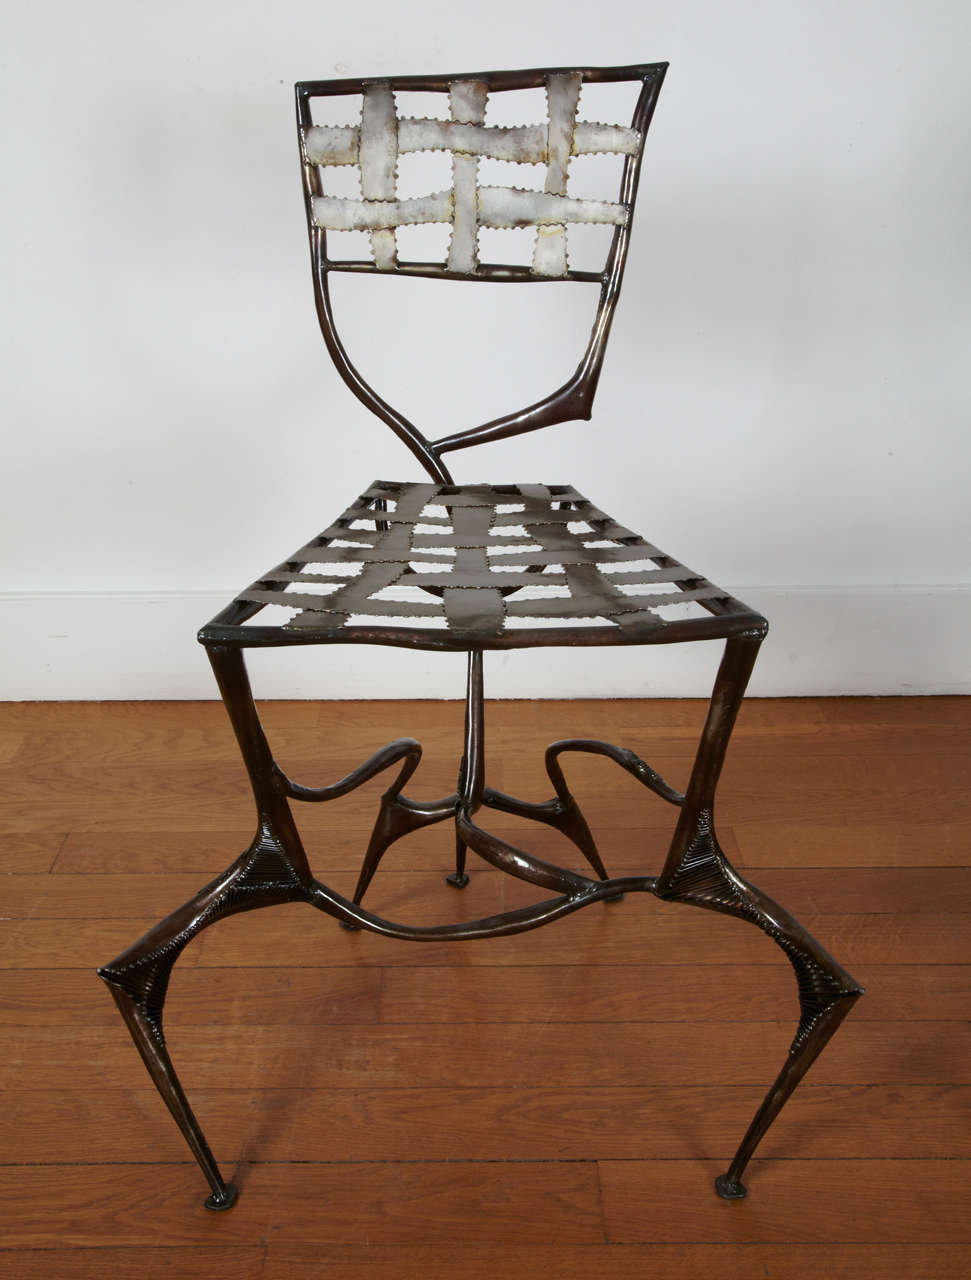 Two Steel Copperware Chairs, 2008 / 2013 by Manuel Simon. 2